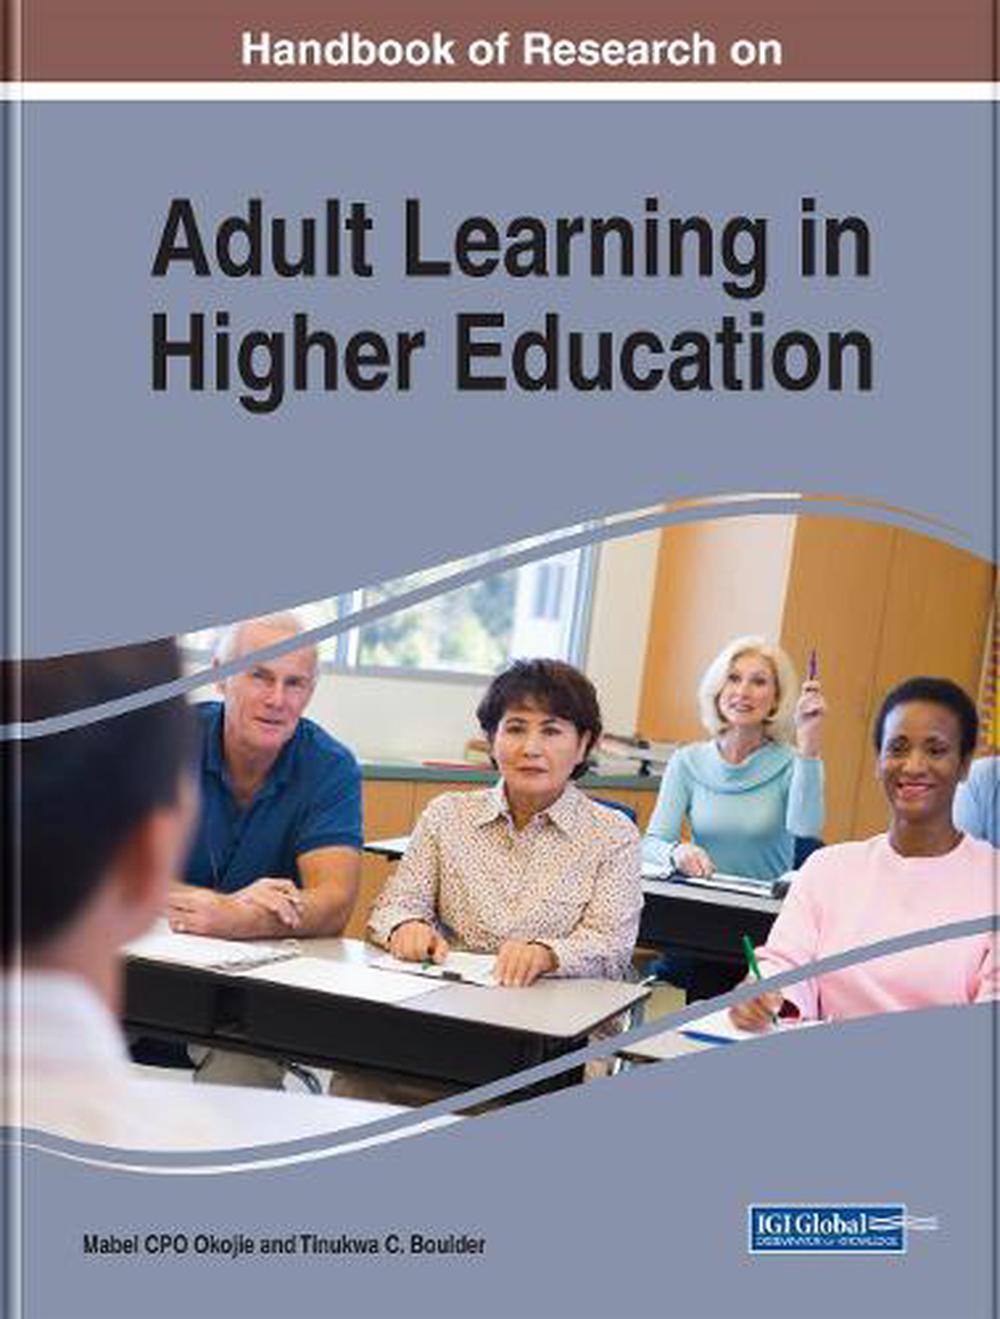 research on adult education has shown that